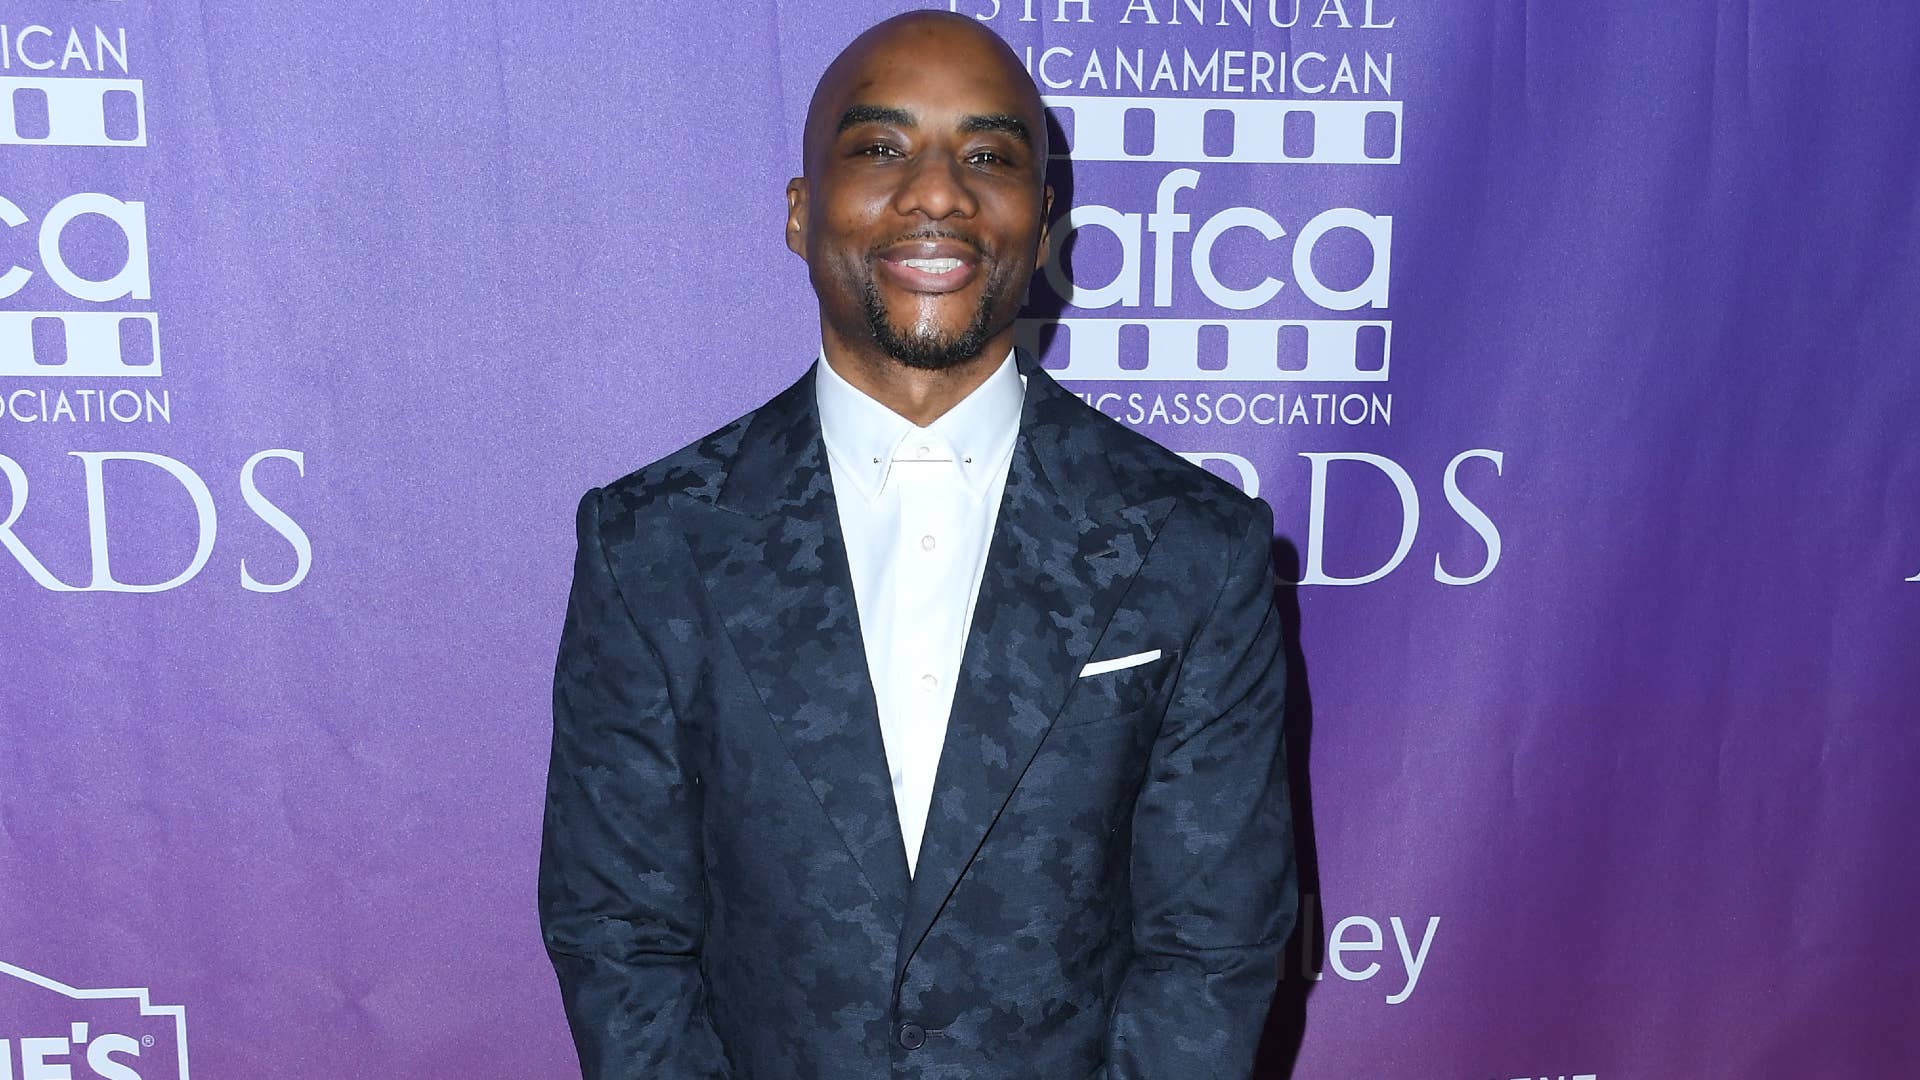 Charlamagne tha God is seen on the red carpet